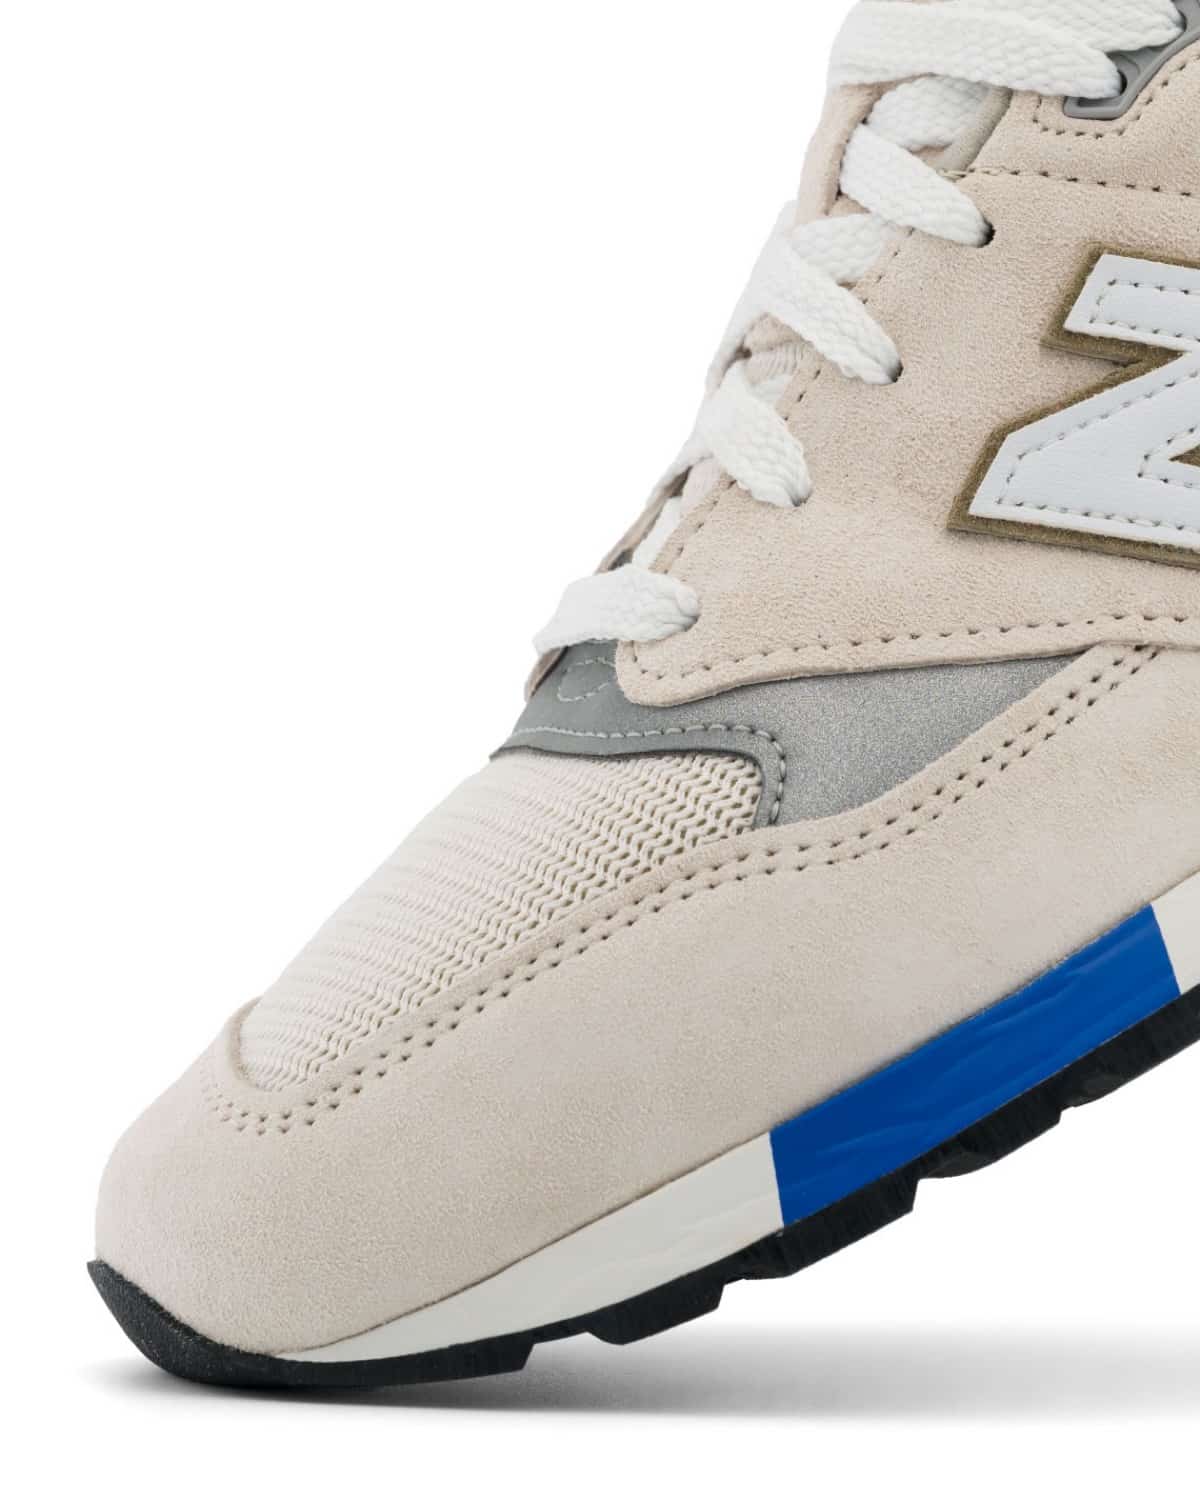 Concepts x New Balance 998 C-Note MADE in USA 10th Anniversary 11